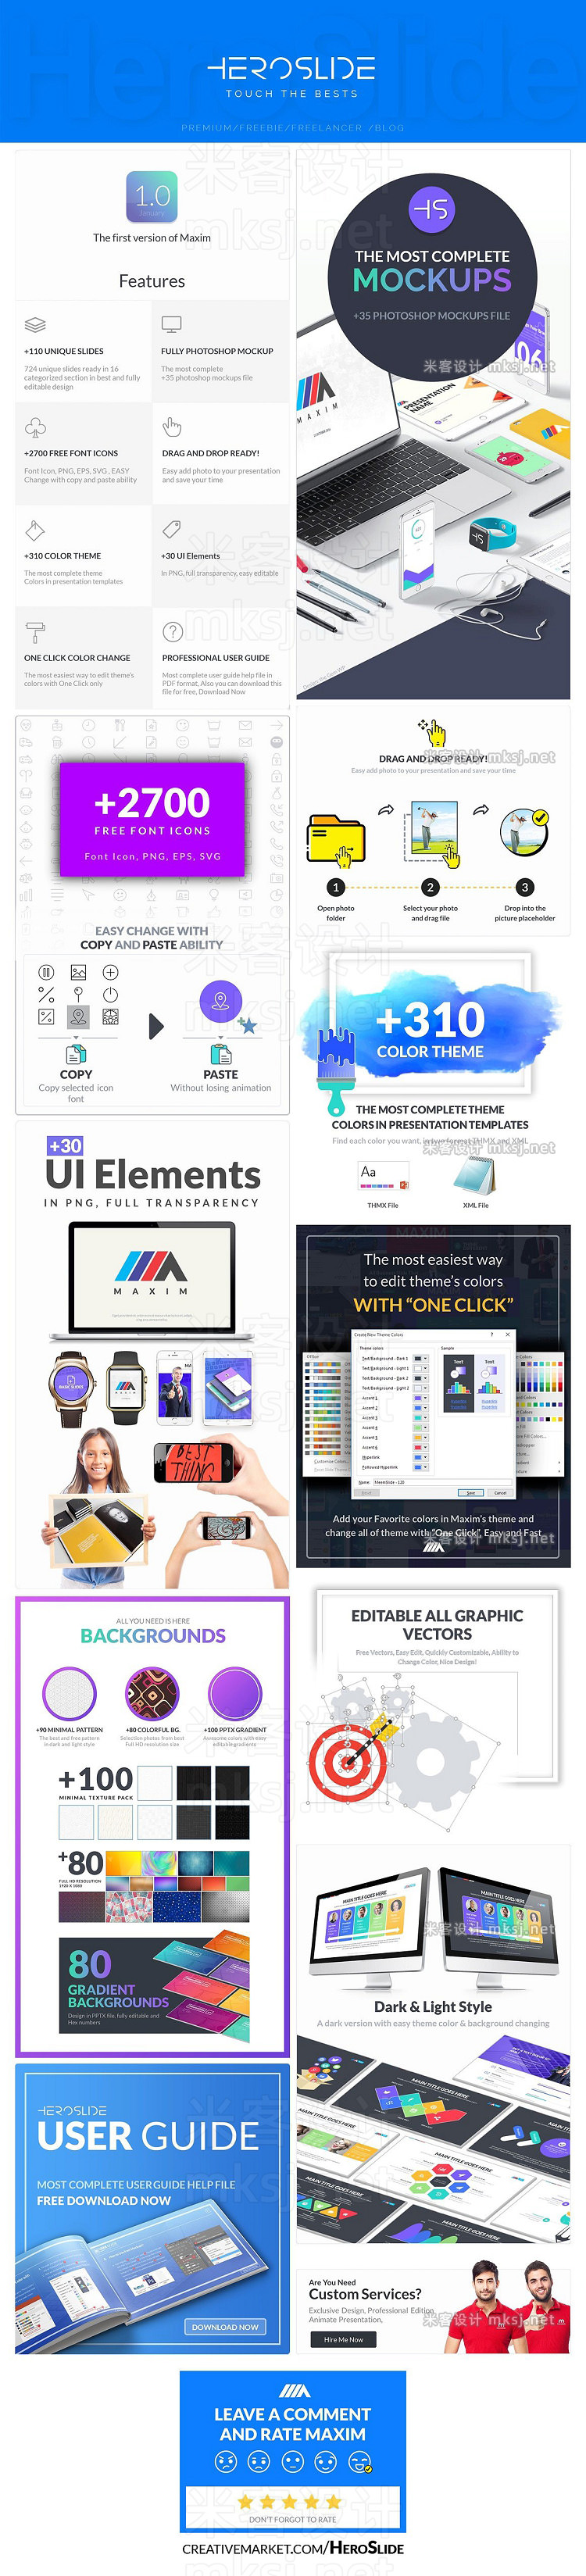 PPT模板 Maxim Business Powerpoint Template